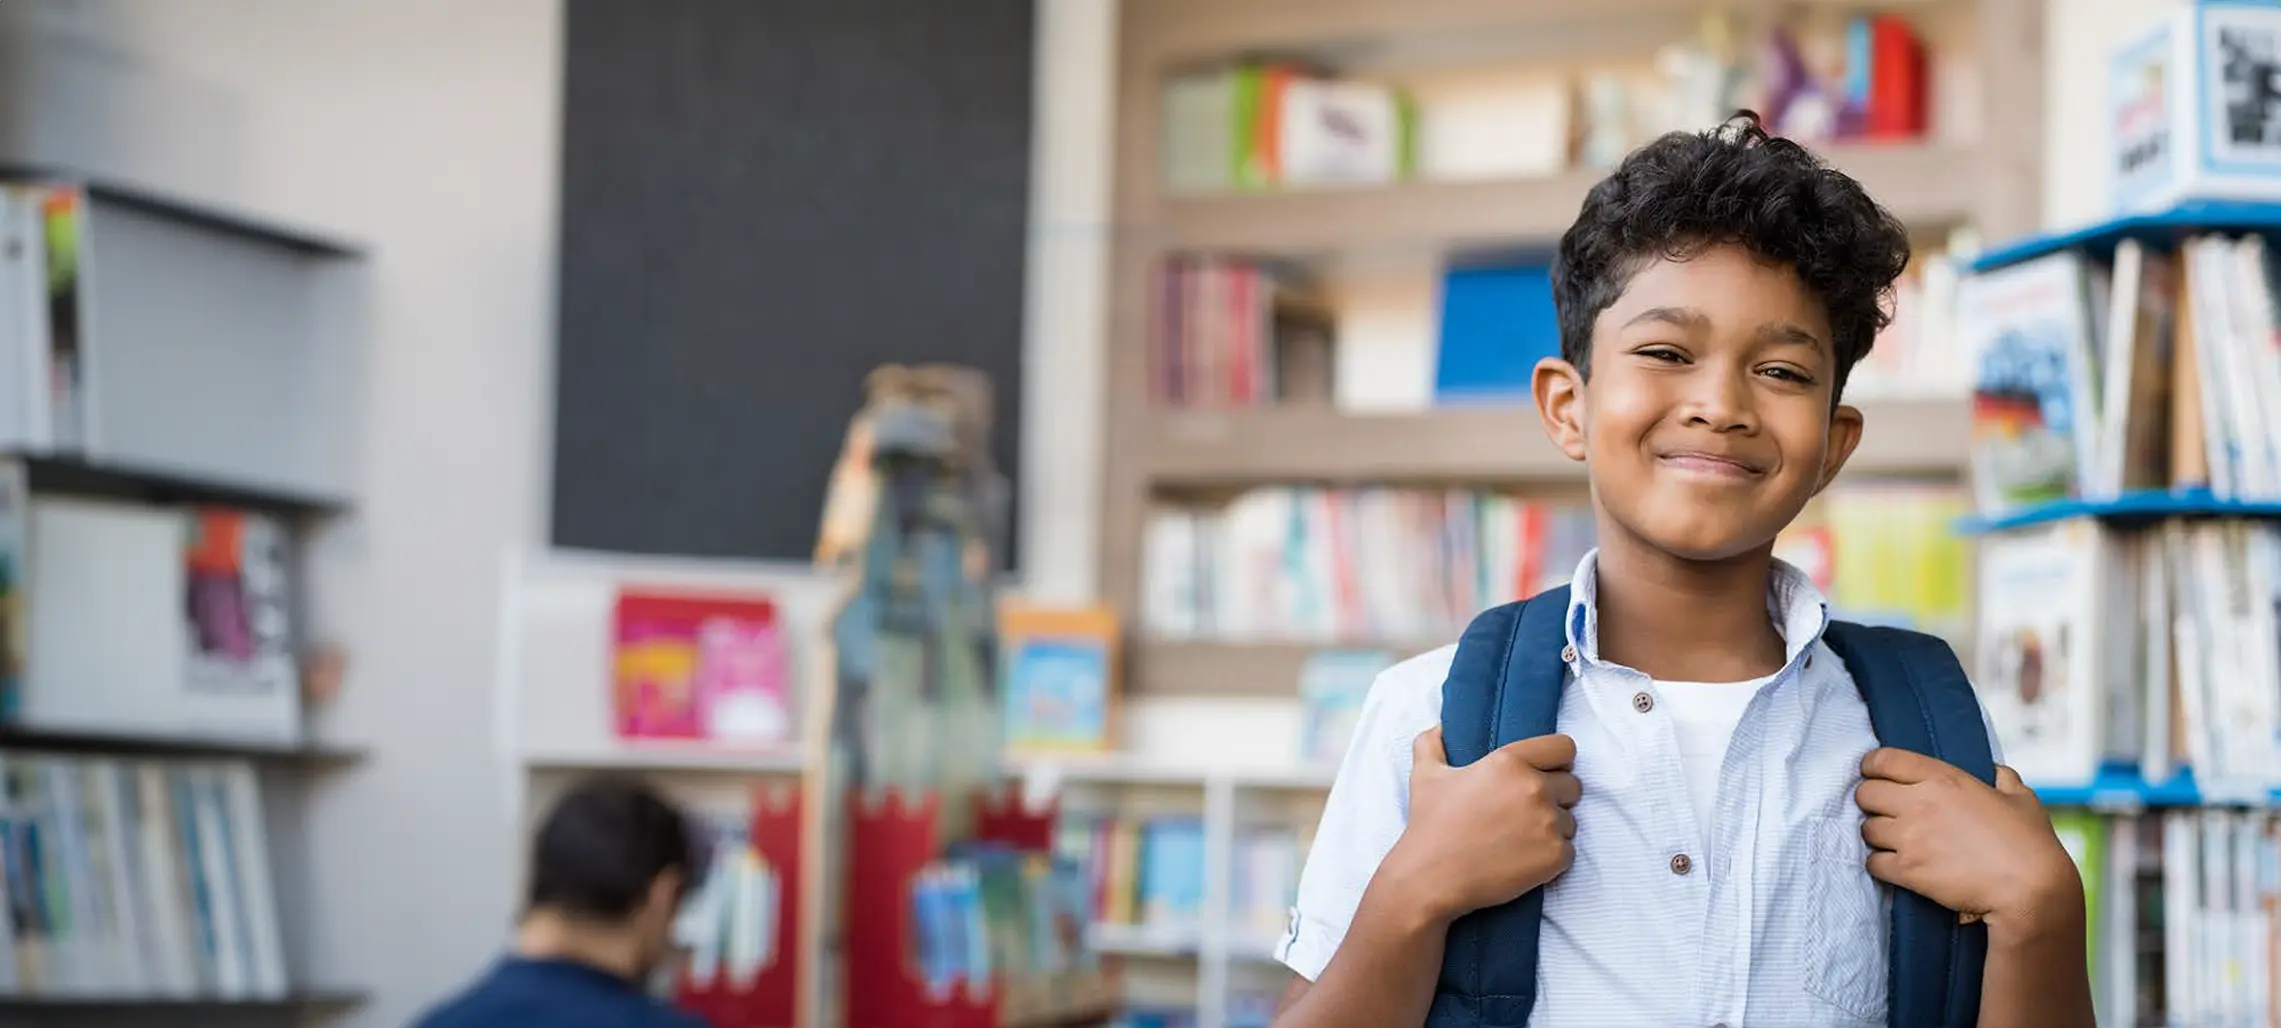 A young male appearing child holding the straps of his backpack smiling towards the camera in what appears to be a library.